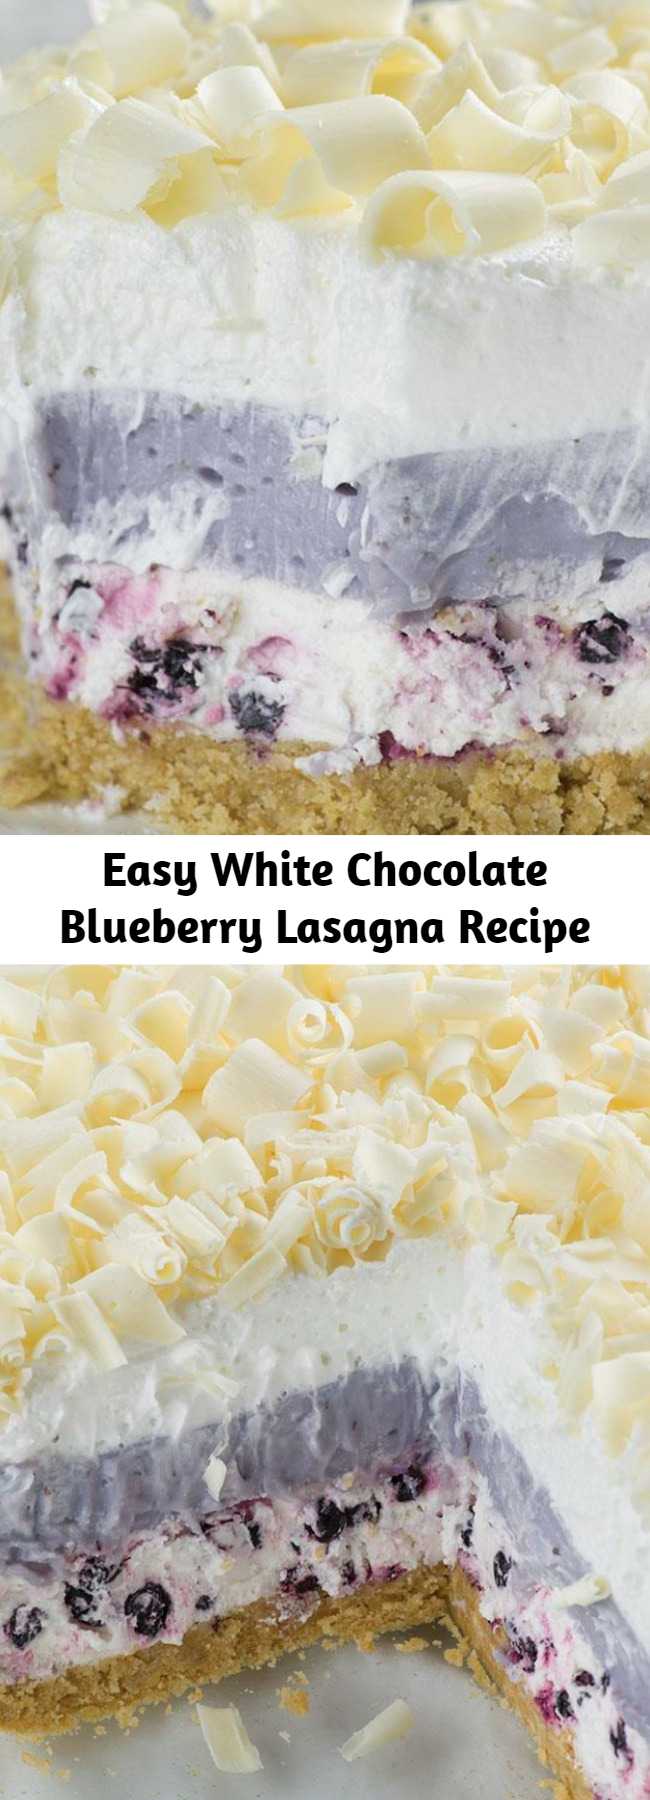 Easy White Chocolate Blueberry Lasagna Recipe - White Chocolate Blueberry Lasagna is perfect summer dessert recipe- light, easy and no oven required!!!